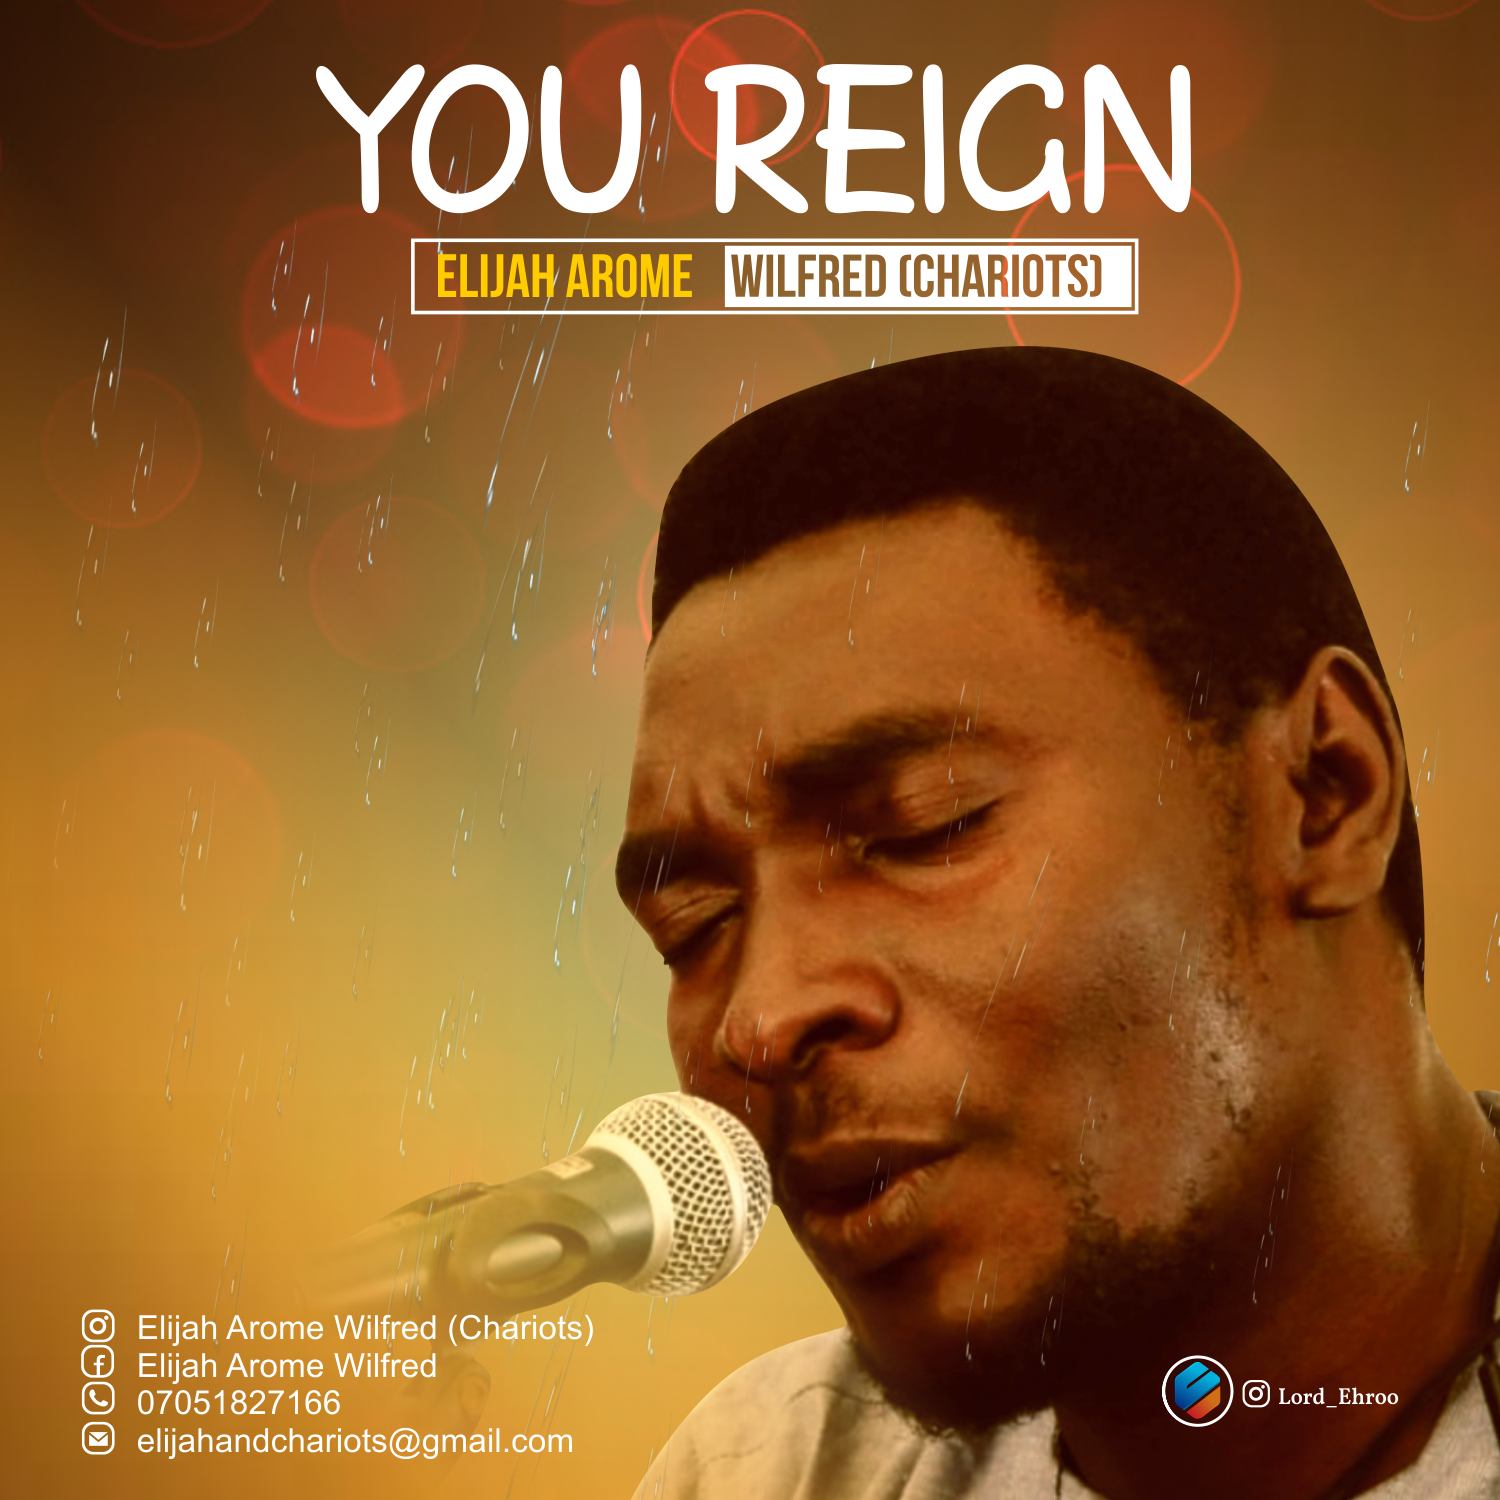 DOWNLOAD- You Reign by Elijah Arome Wilfred (Chariots ) @Zoneoutnaija